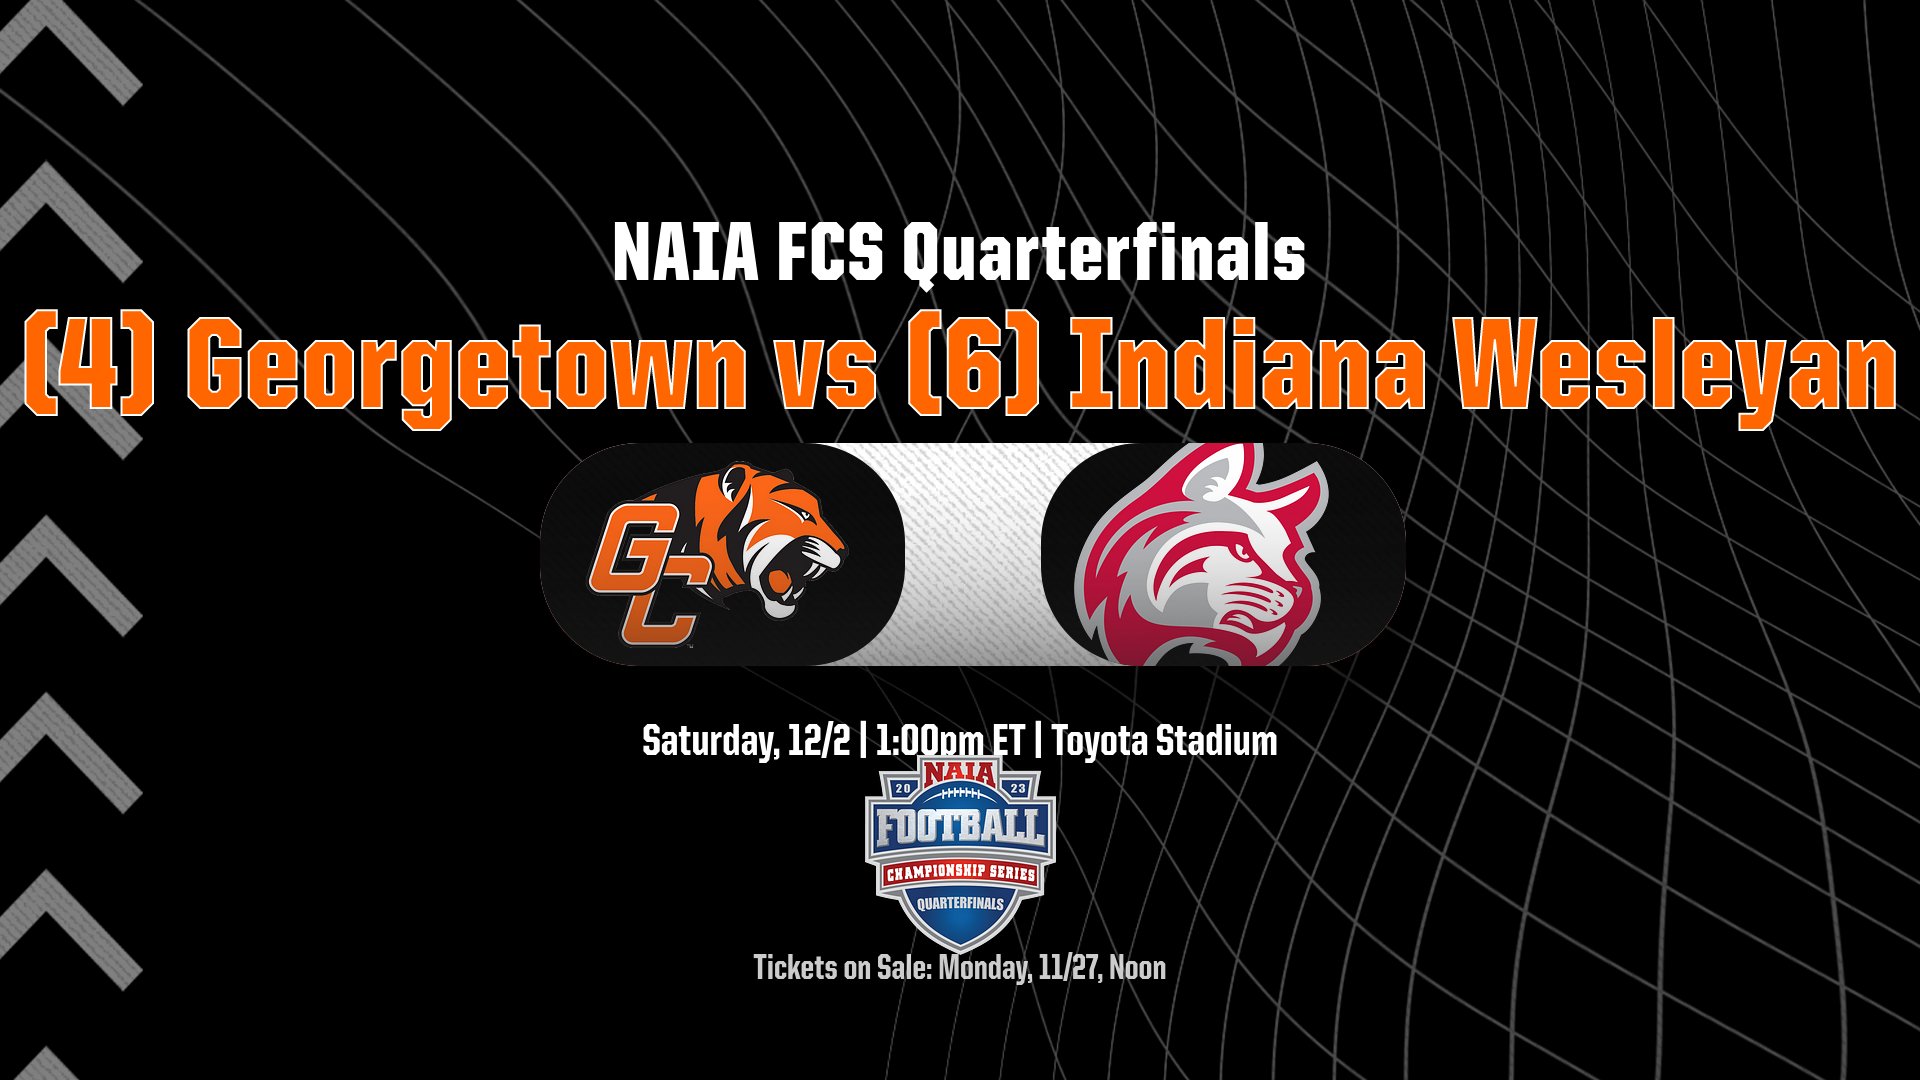 Georgetown faces Indiana Wesleyan in NAIA FCS Quarterfinals